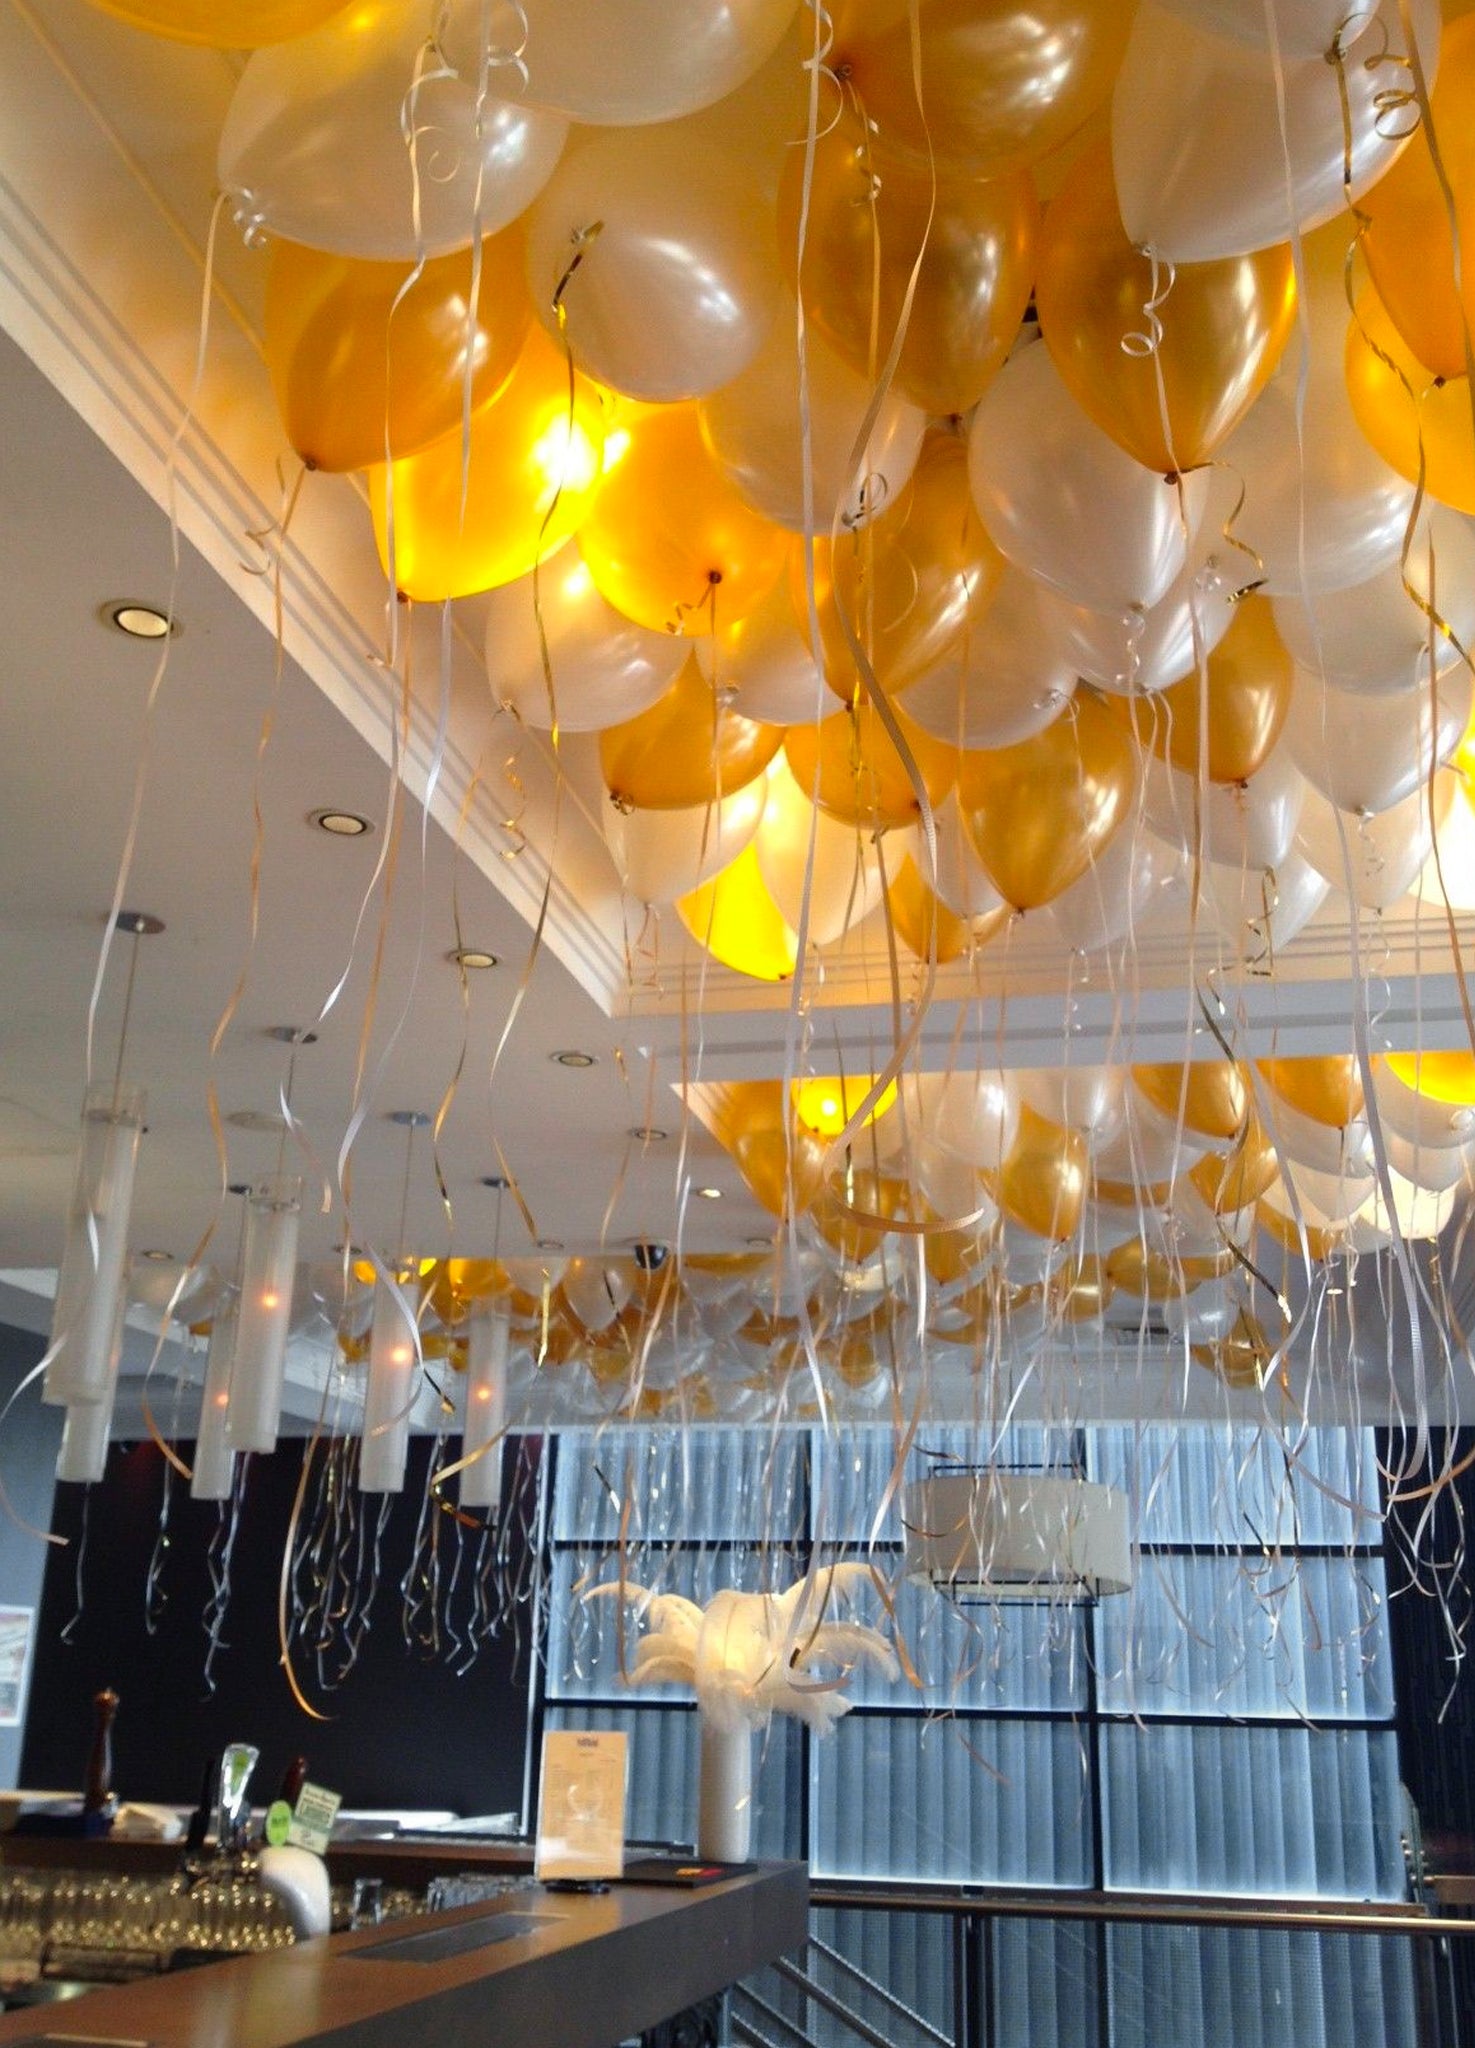 We #love #home #events! #balloons #loose #balloon #ceiling #delivered and  #setup by #highlifeballoons | Balloon ceiling, Hanging balloons, Balloons